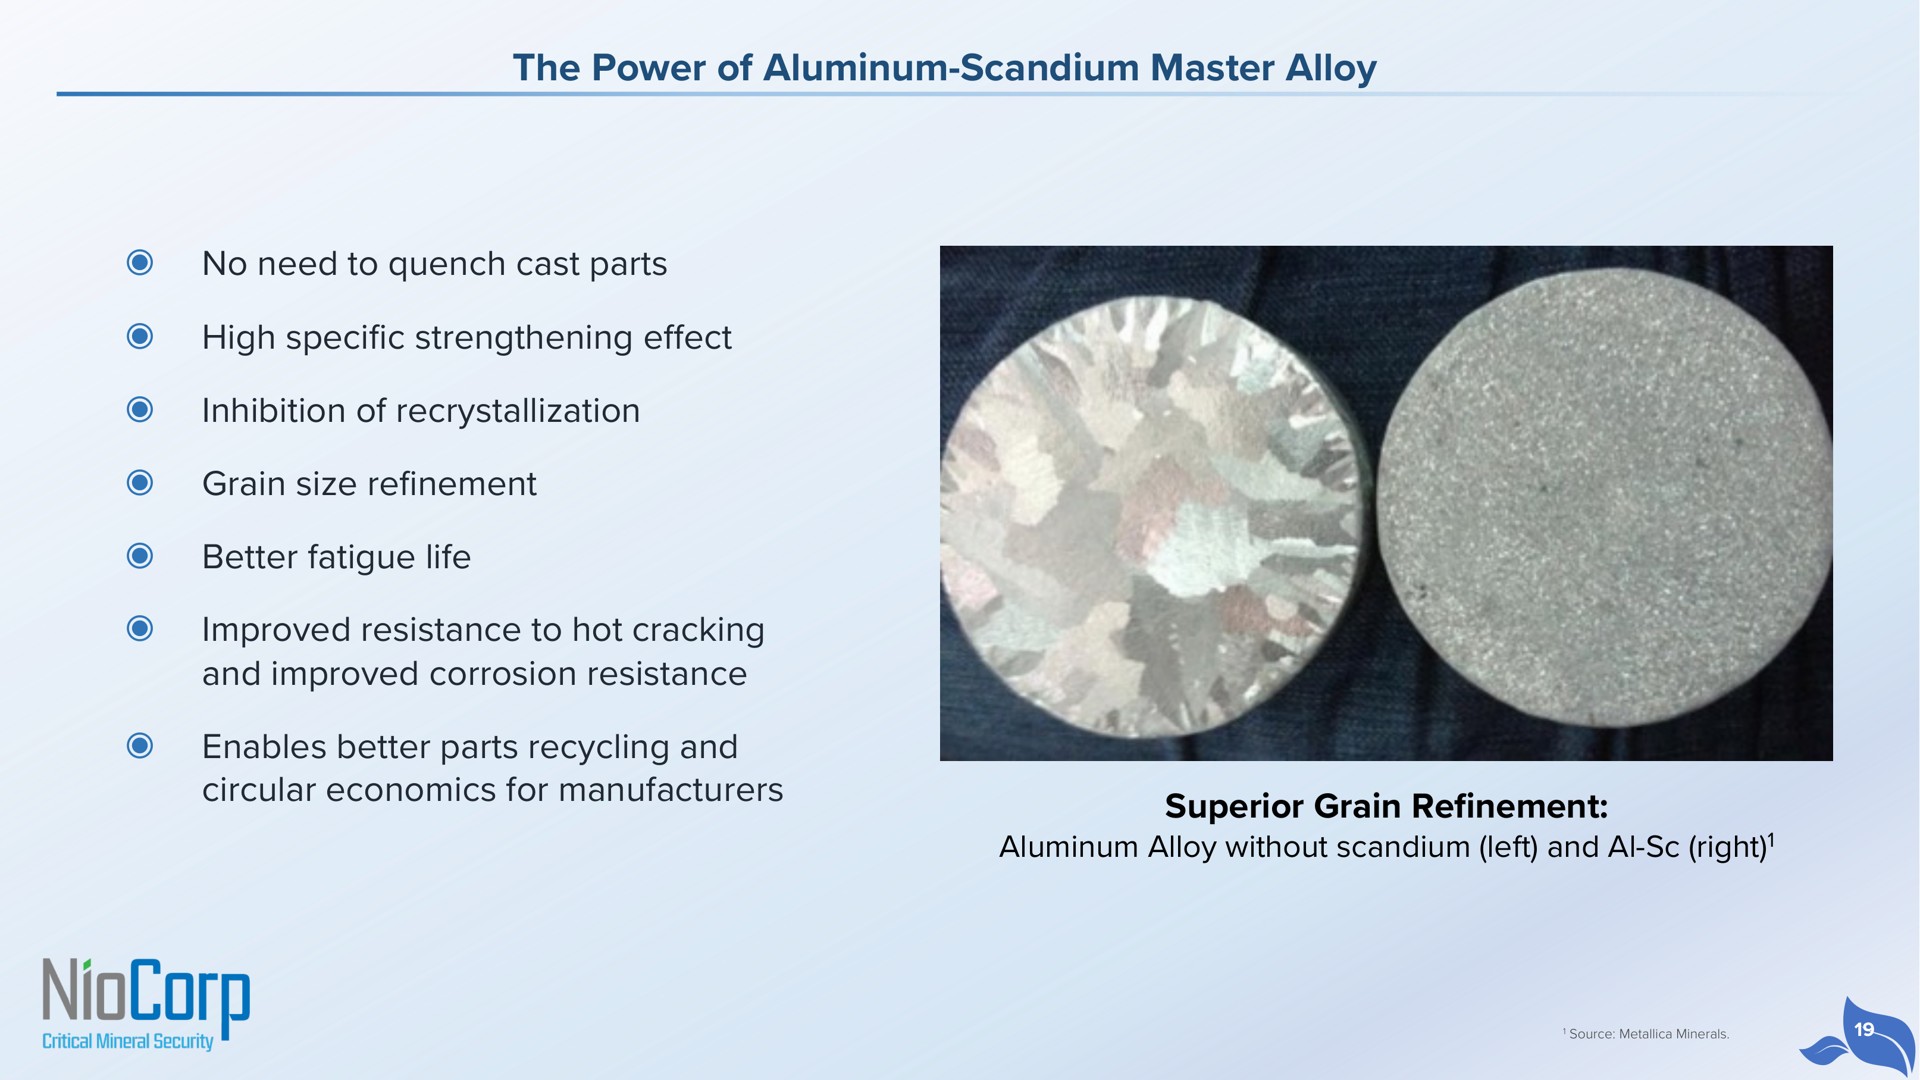 the power of aluminum scandium master alloy no need to quench cast parts high specific strengthening effect inhibition of recrystallization grain size refinement better fatigue life improved resistance to hot cracking and improved corrosion resistance enables better parts recycling and circular economics for manufacturers superior grain refinement aluminum alloy without scandium left and right | NioCorp